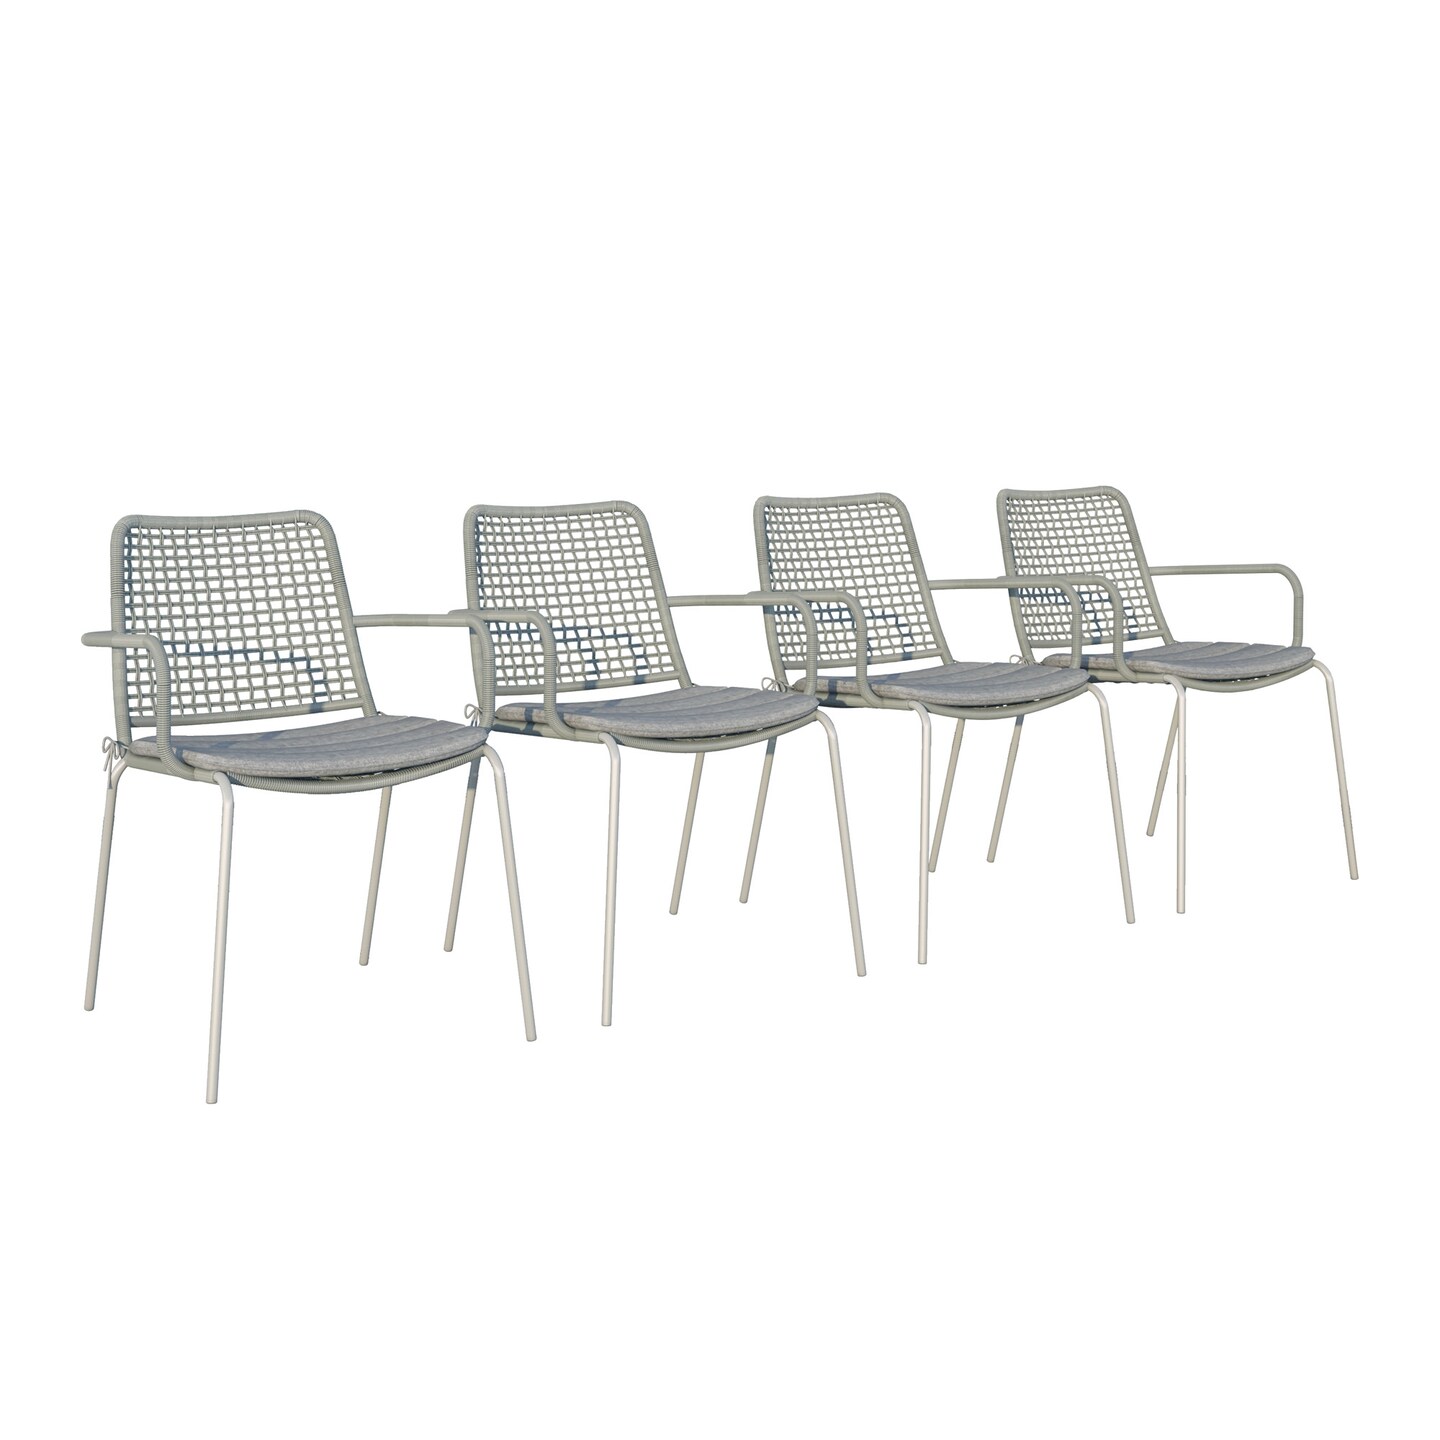 Outdoor Living and Style Set of 4 Gray and Silver Indoor and Outdoor Contemporary Chairs